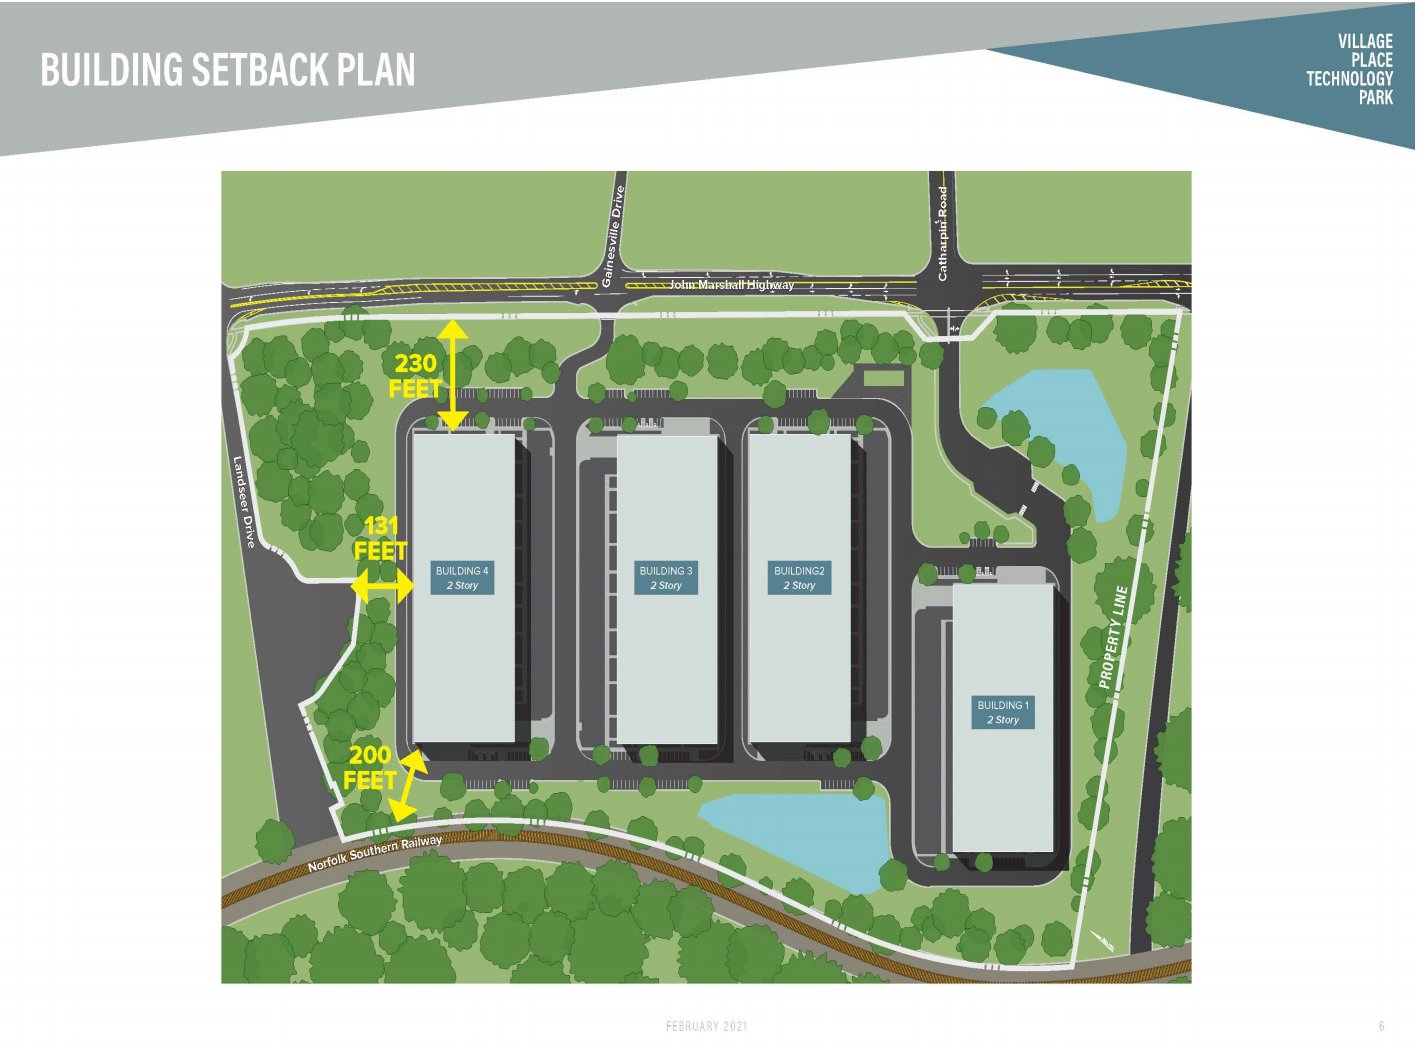 Four data center are planned for the property